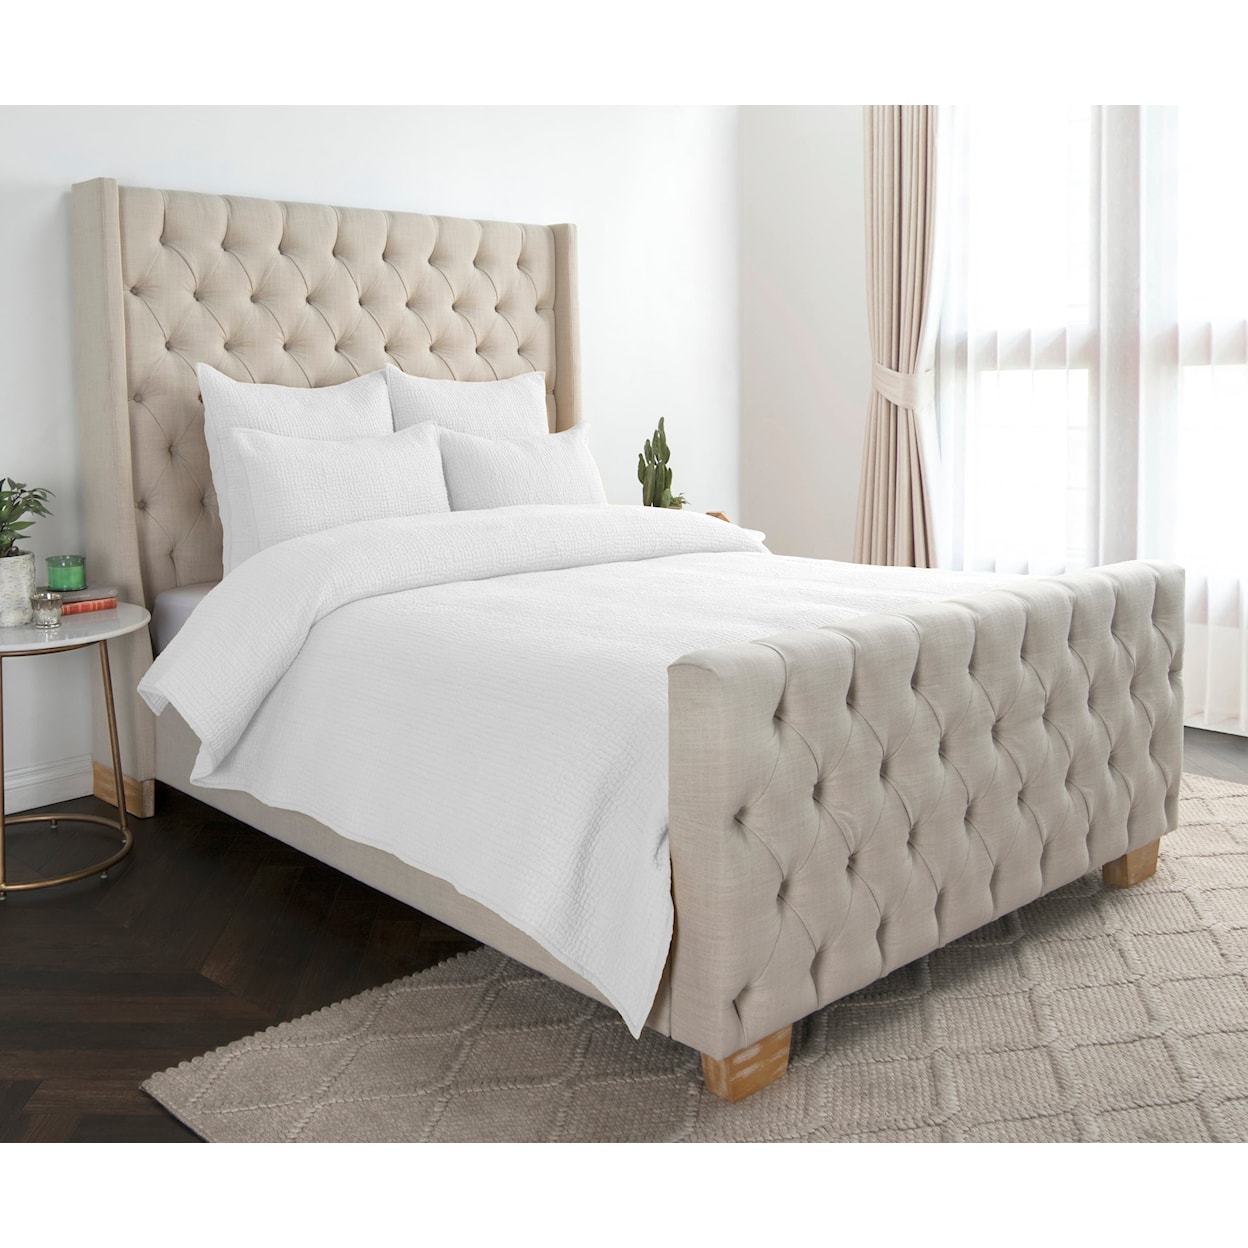 Classic Home Bedding DANICA WHITE QUEEN QUILT